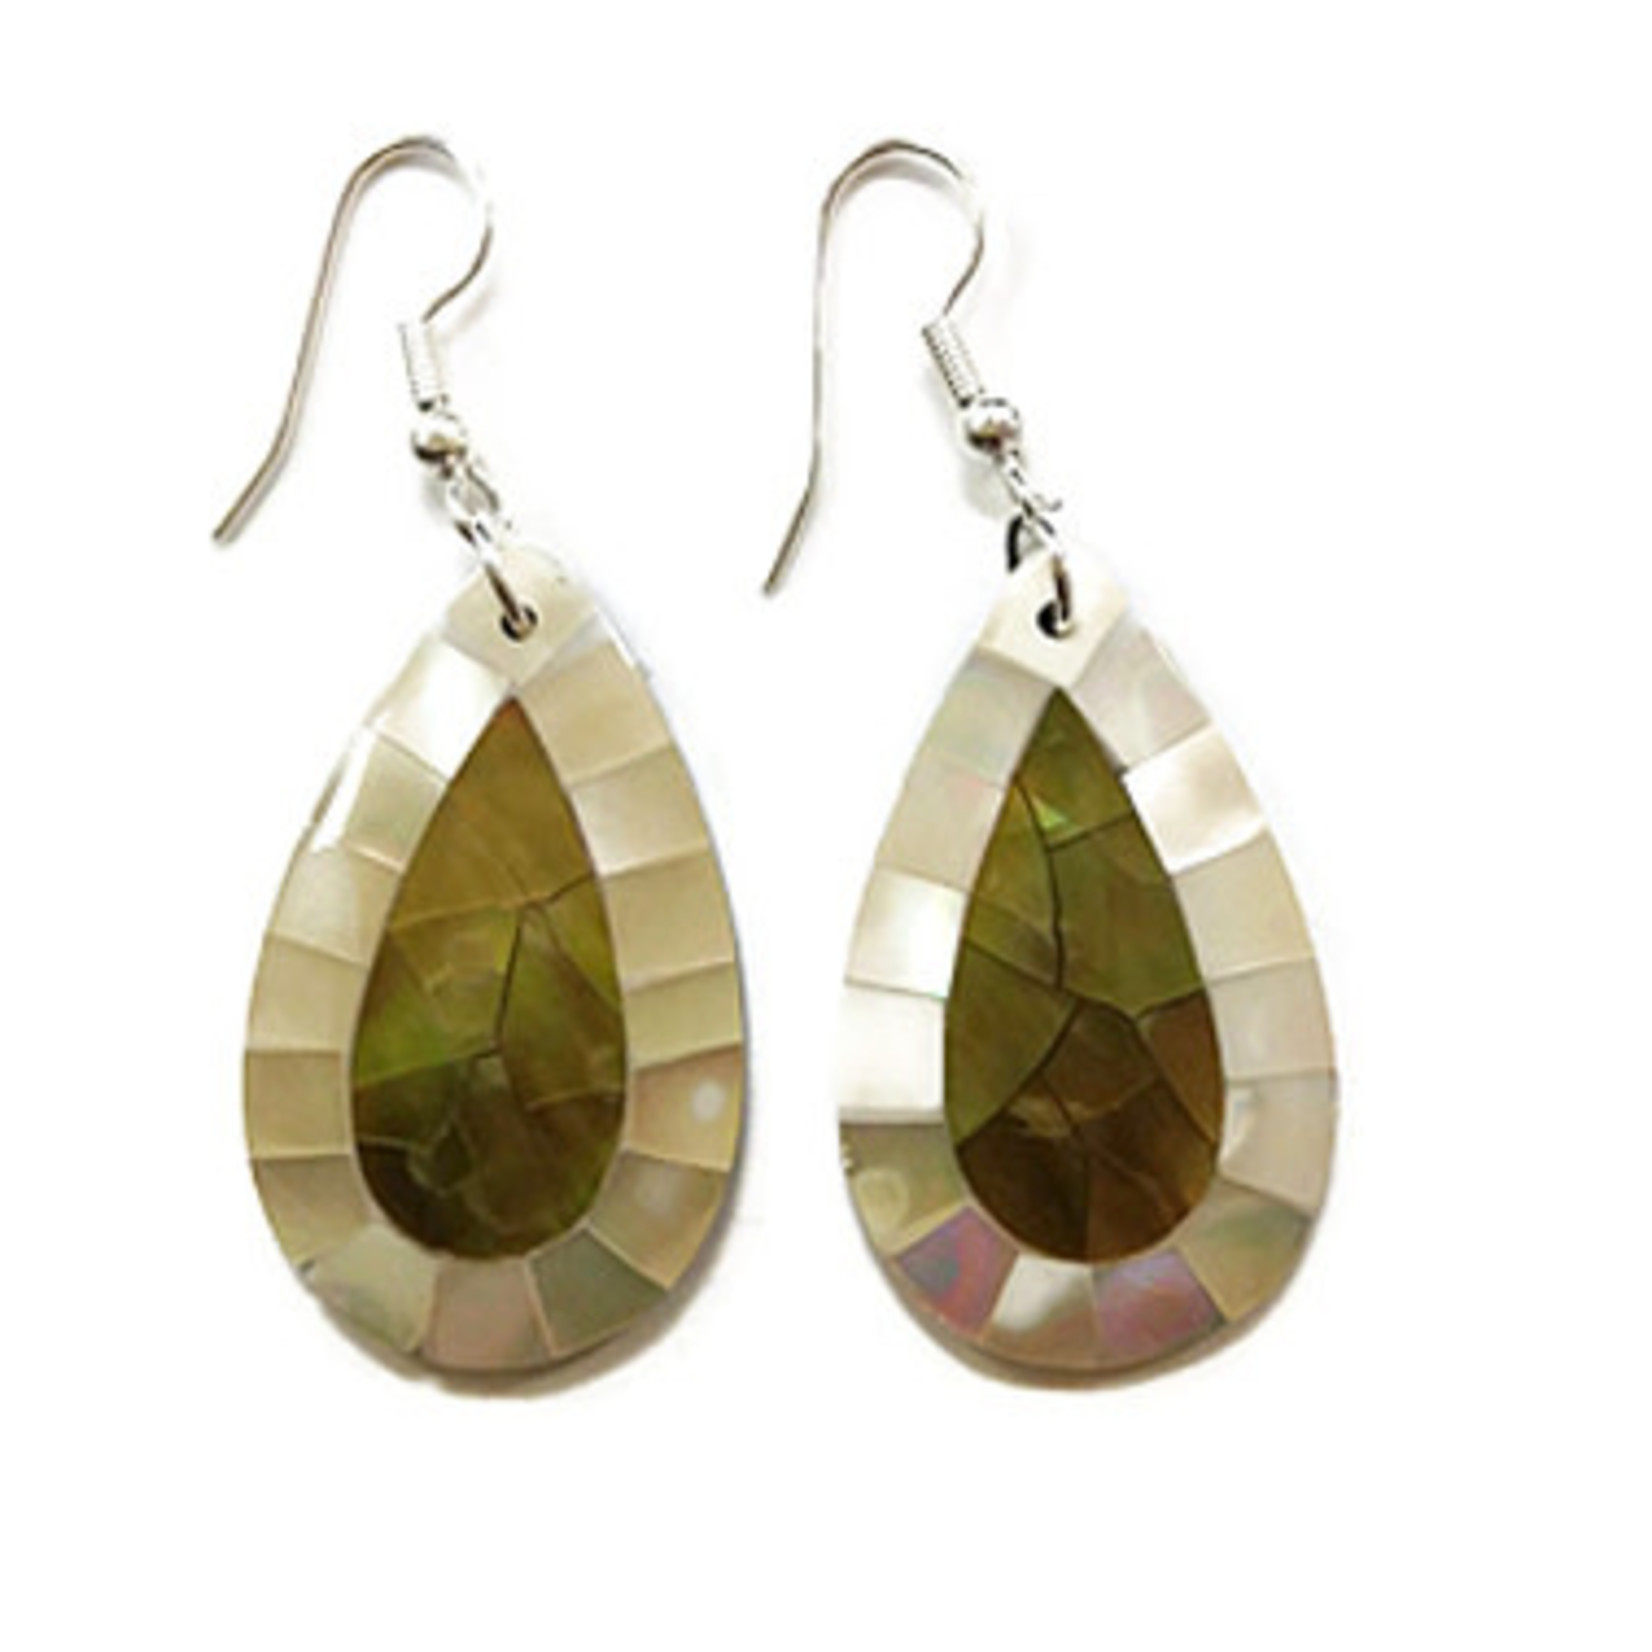 EA106 Shell Earrings Gold Teardrop with White Mother of Pearl Rim